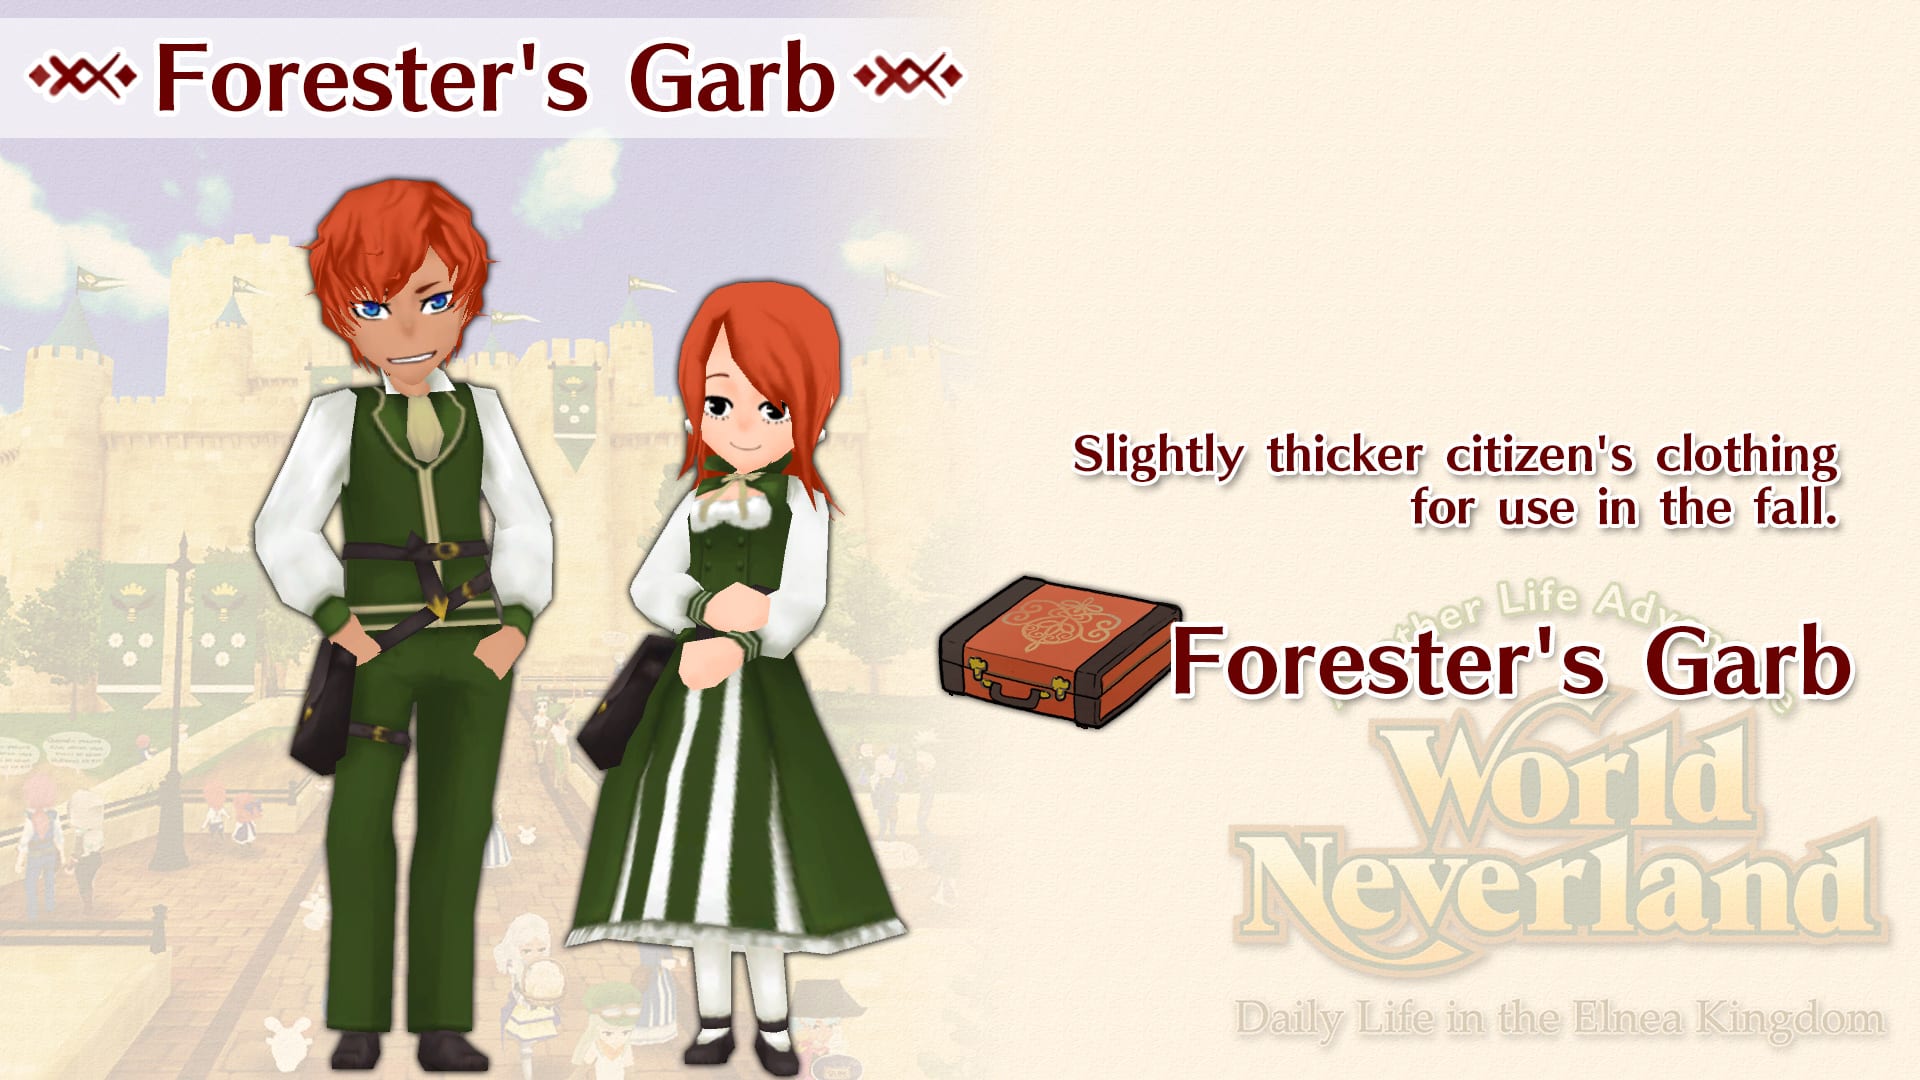 Forester's Garb